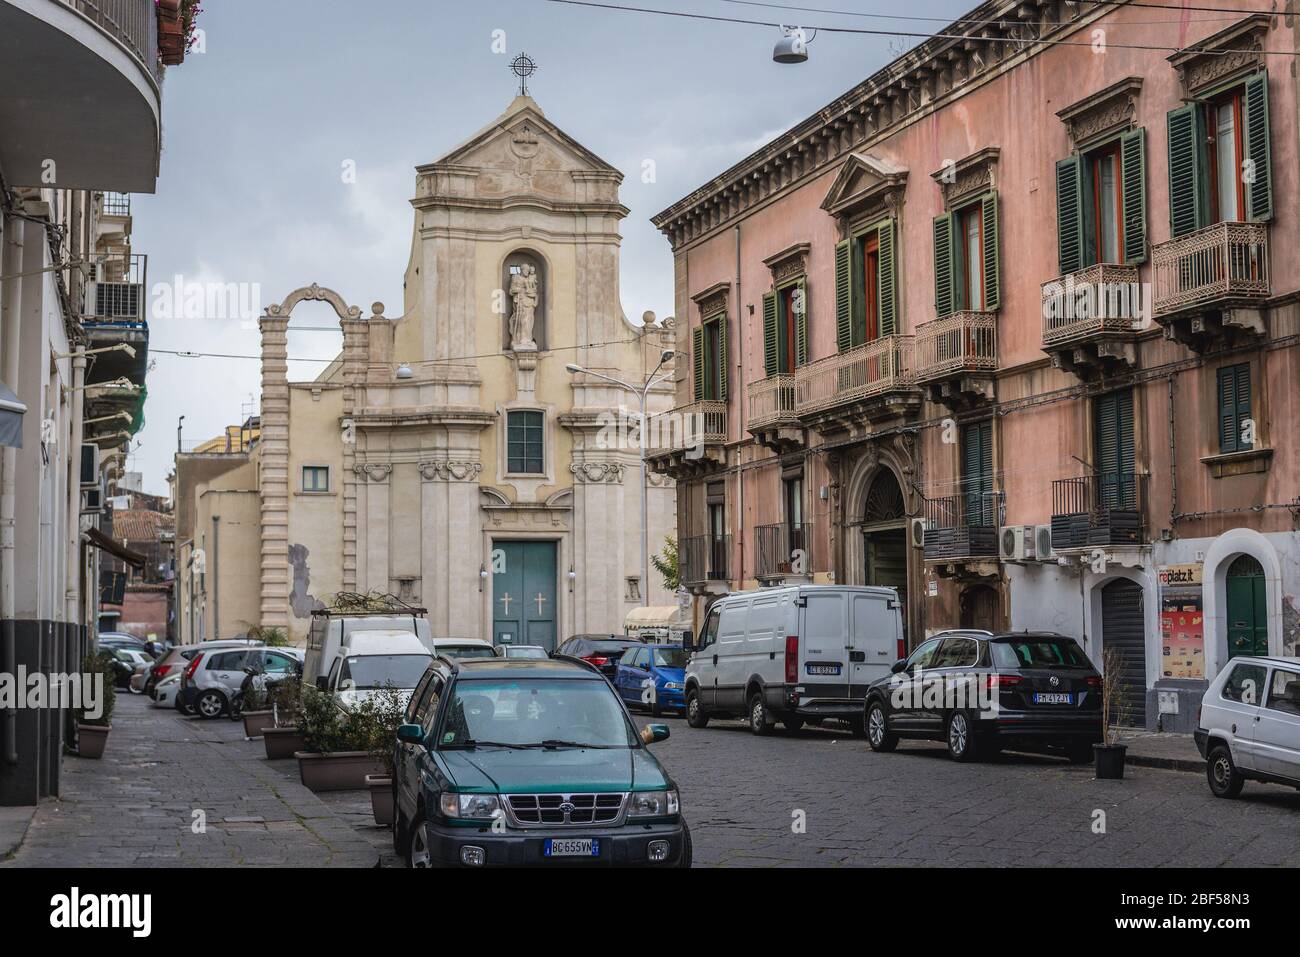 Church of San Giuseppe al Transito in Catania, second largest city of Sicily island in Italy Stock Photo